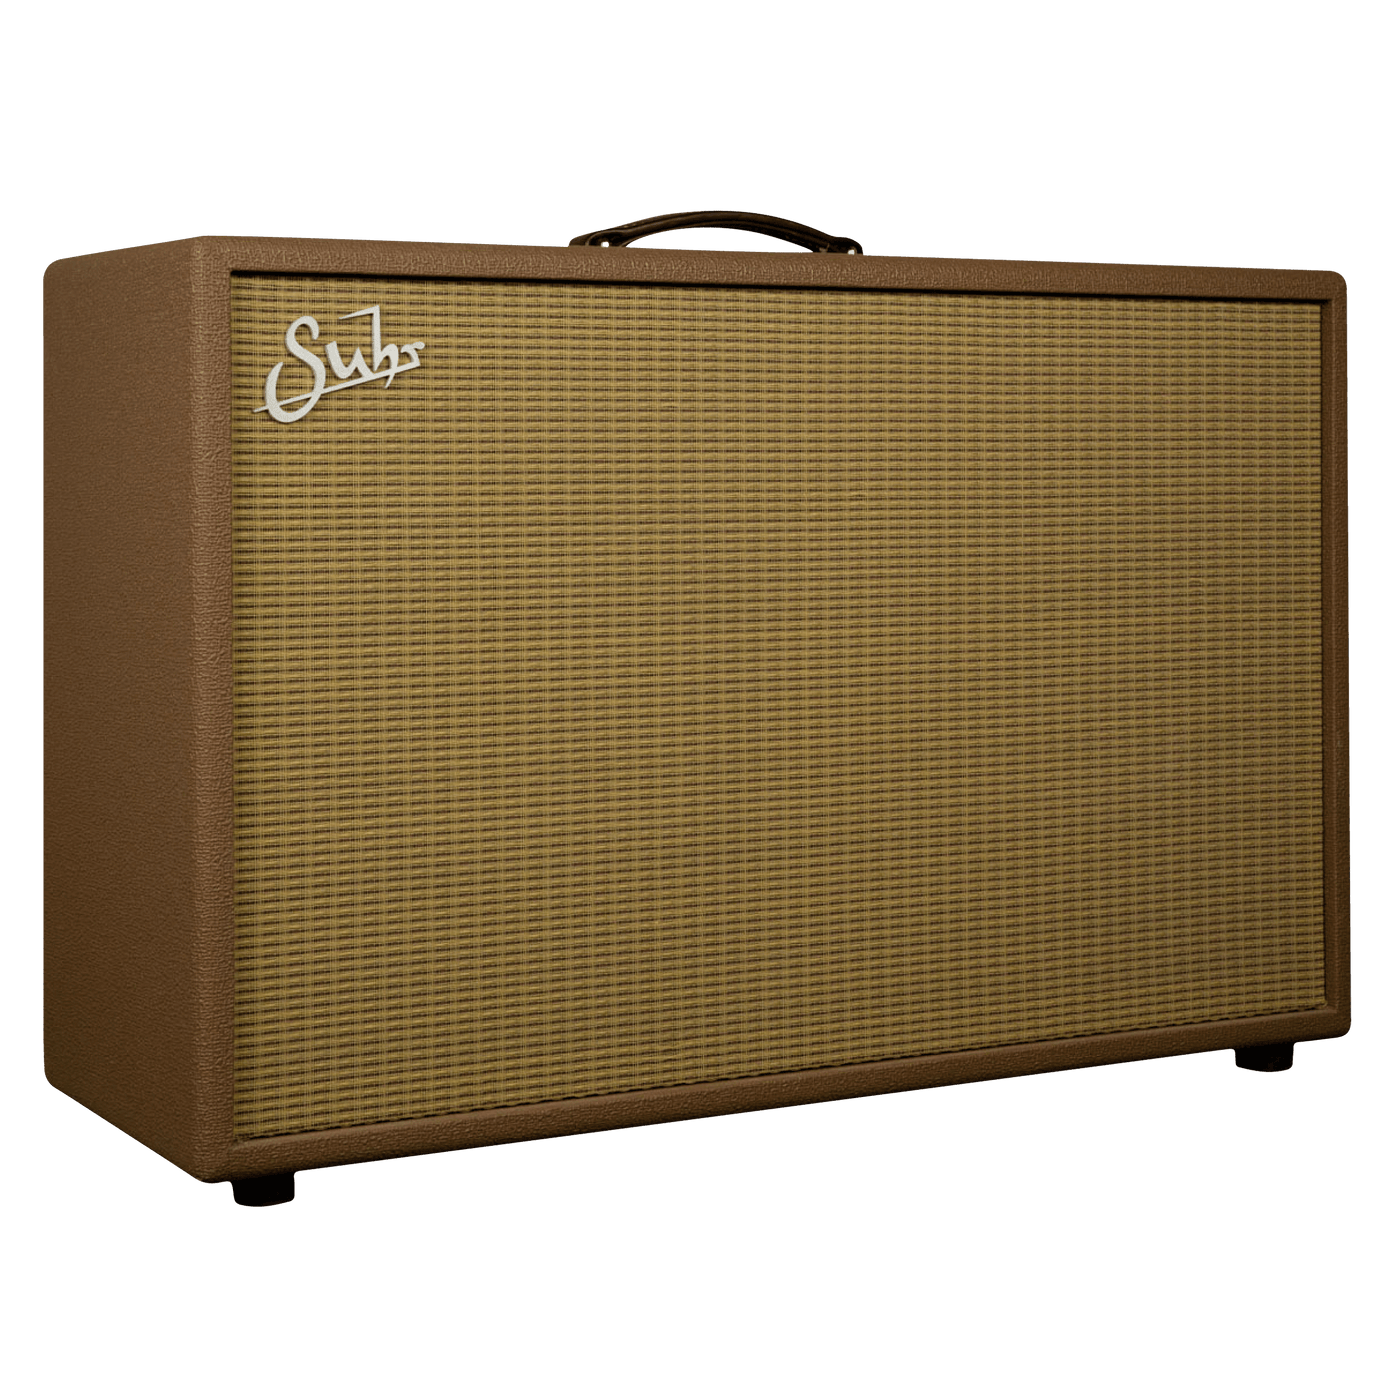 Suhr Hombre 2x12 - $999990 - Gearhub - The all-new Hombre 2×12 cabinet is the perfect companion to the new Suhr Hombre head amplifier. Going back to the BIG vintage 2×12 cabs that once shared the stage with legends, yielding a quintessential tone of the ’60s, the Suhr Hombre 2×12 comes complete with the low-end, vintage warmth that can fill a room. Paired with the new Suhr Hombre head, the Hombre 2×12 cab delivers a massively rich tone with incredible clarity throughout the range of sounds the Hombre head i